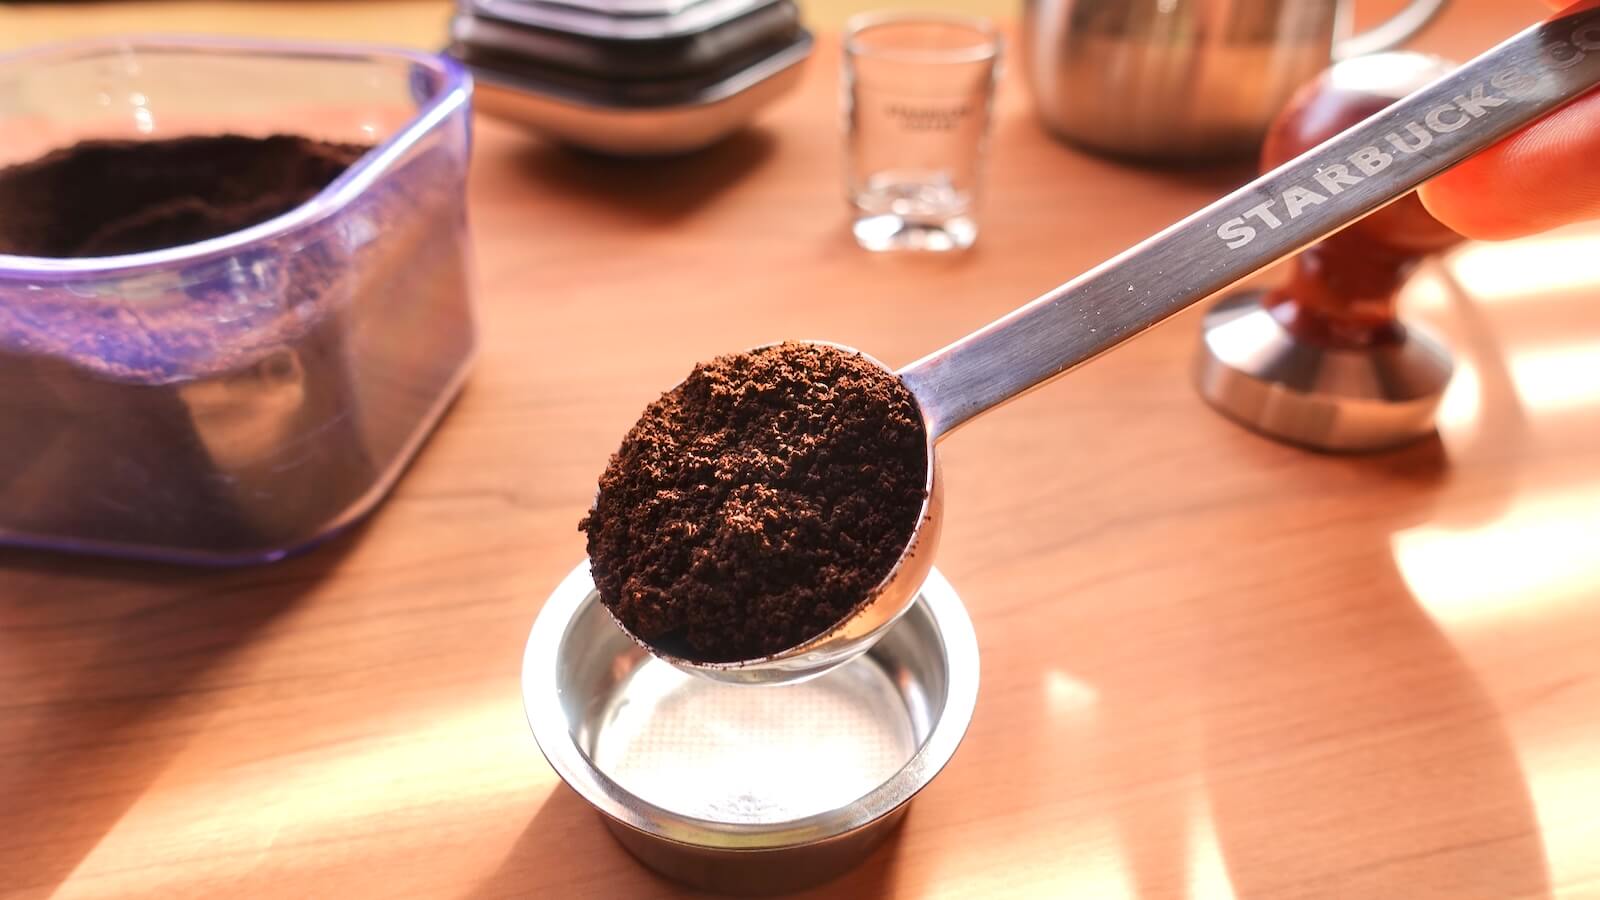 Photo of coffee powder being put into the filter with a measuring spoon